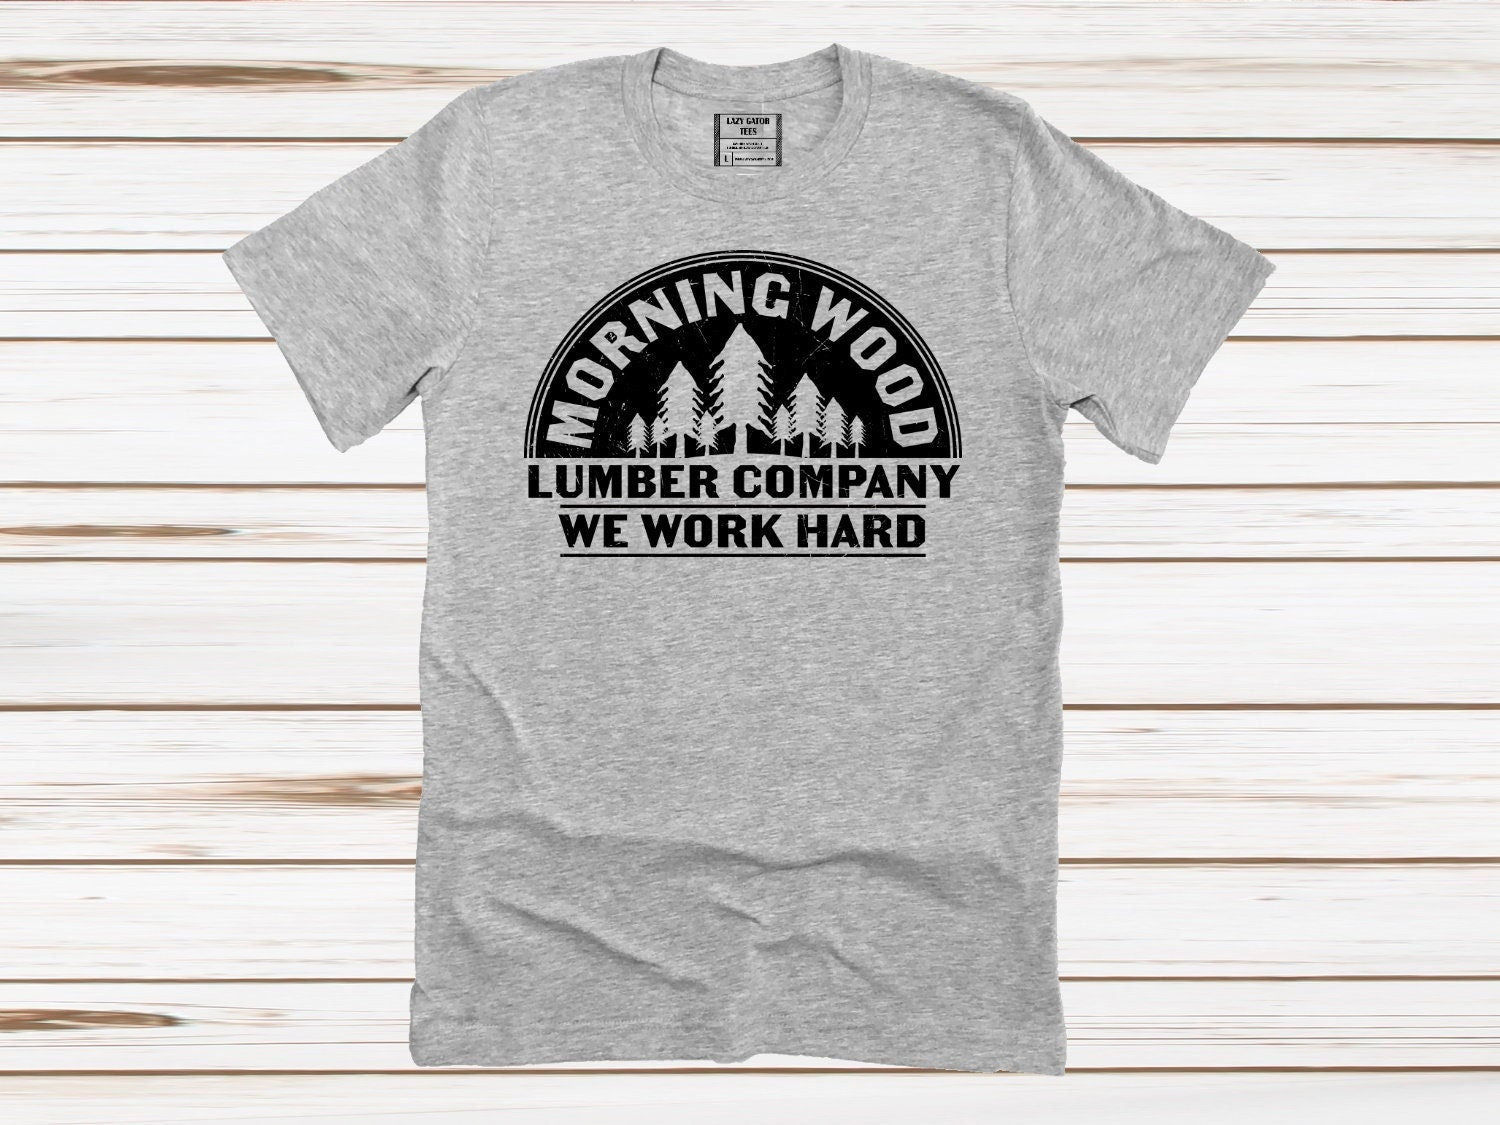 Morning Wood Lumber Company Funny Guys Tee, Woodworker Shirt, Funny Father's Day Shirt Unisex Novelty T-Shirt